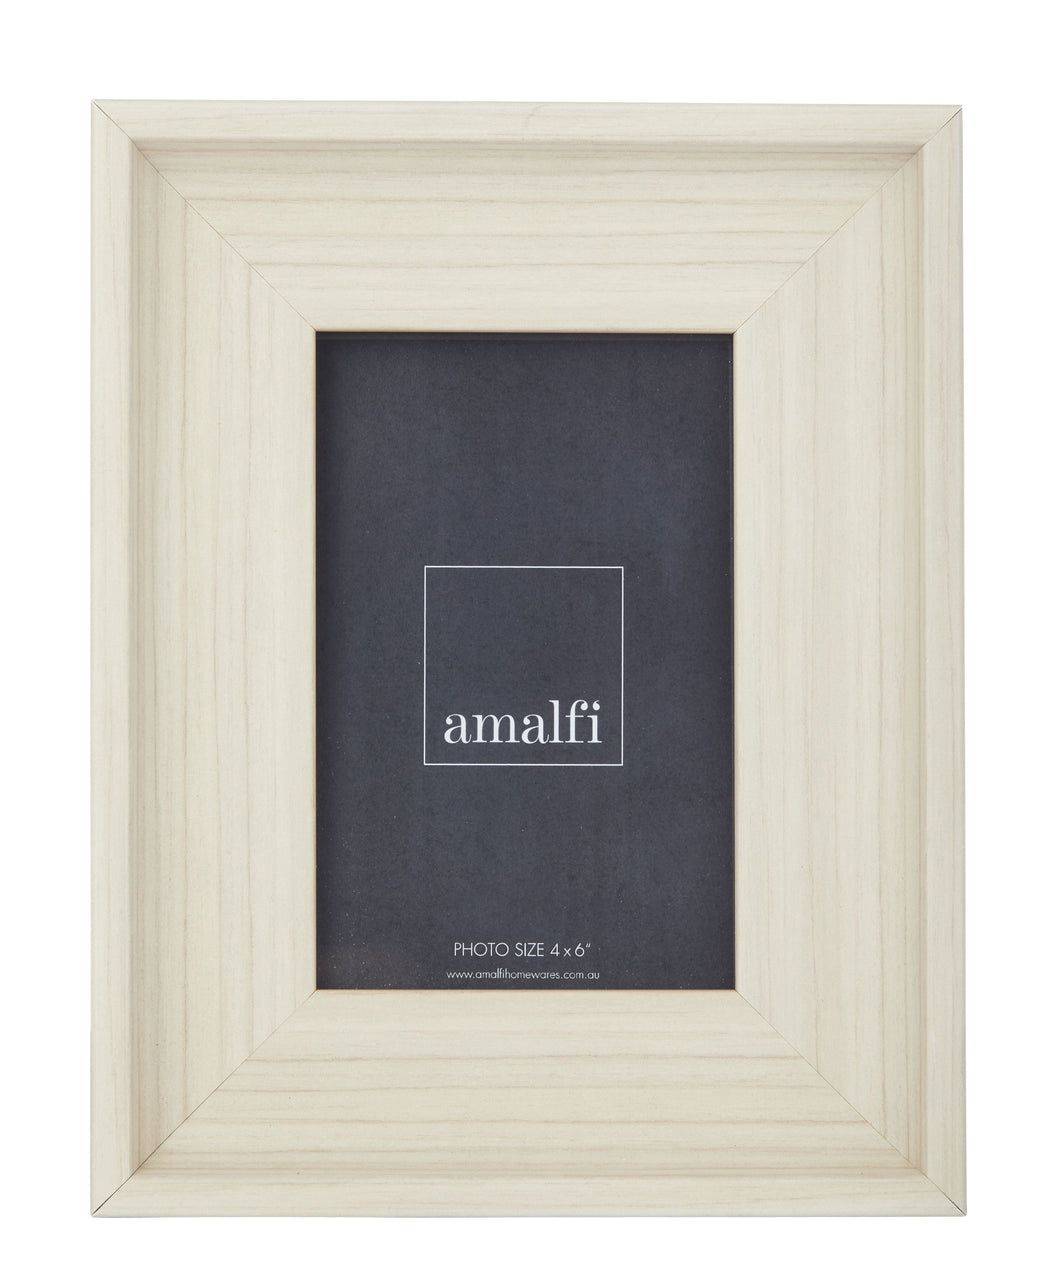 LONDON 5 X 7 PICTURE FRAME 26CM